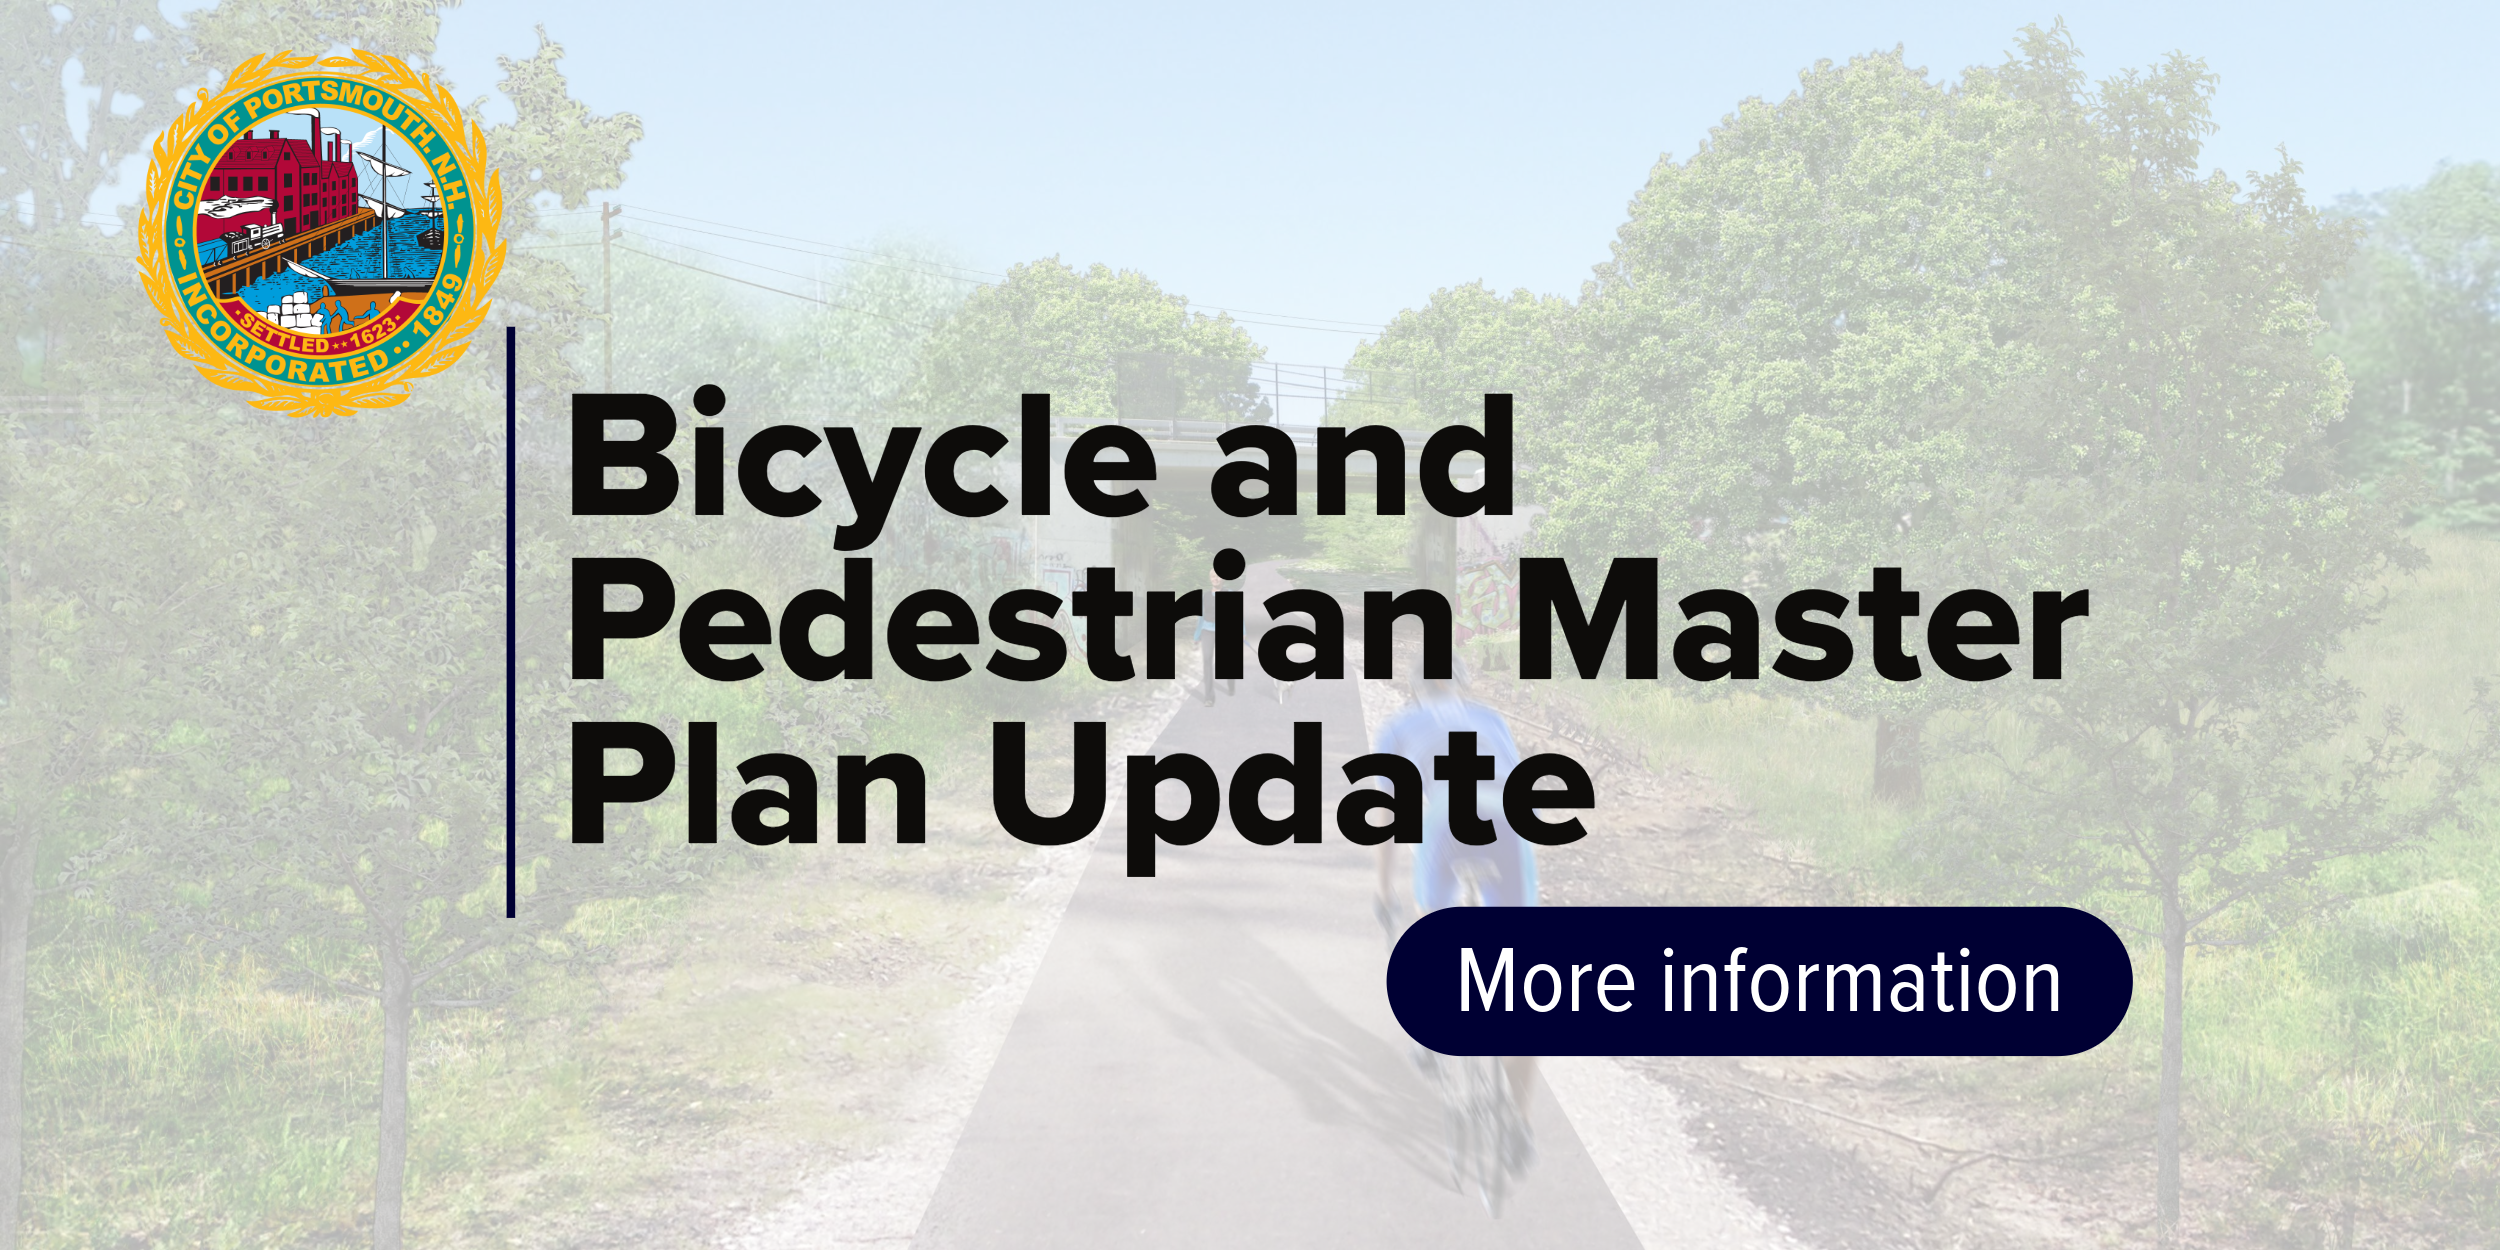 Bicycle and Pedestrian Master Plan Update Link Image